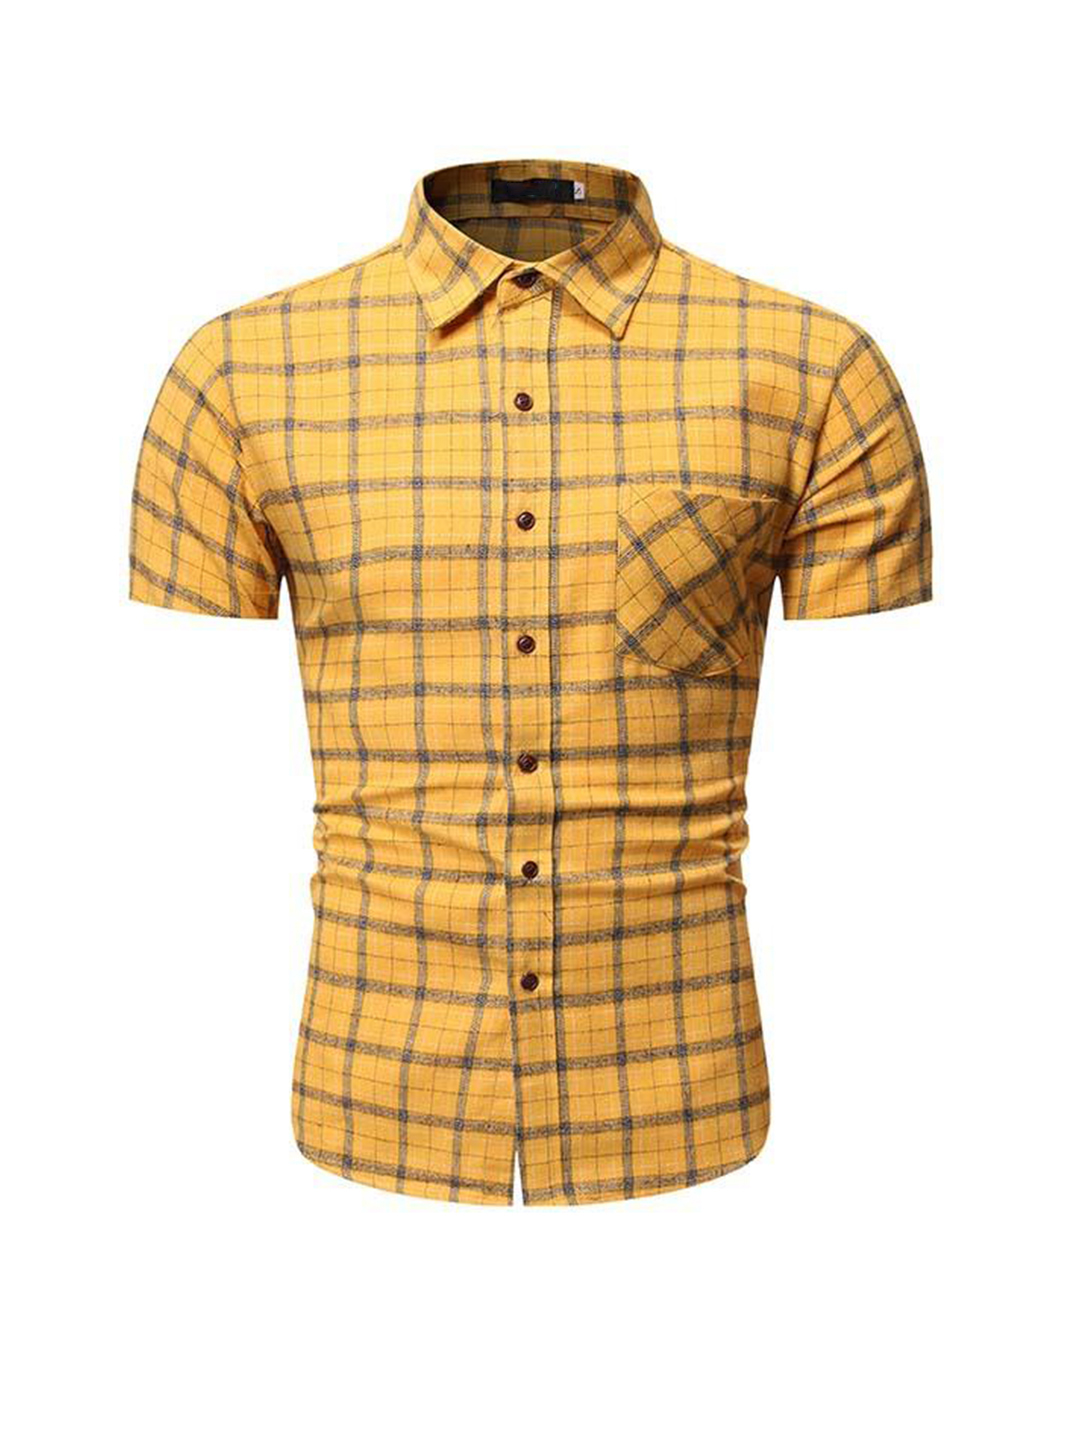 Men's Billy Check Shirt With Pocket-poisonstreetwear.com